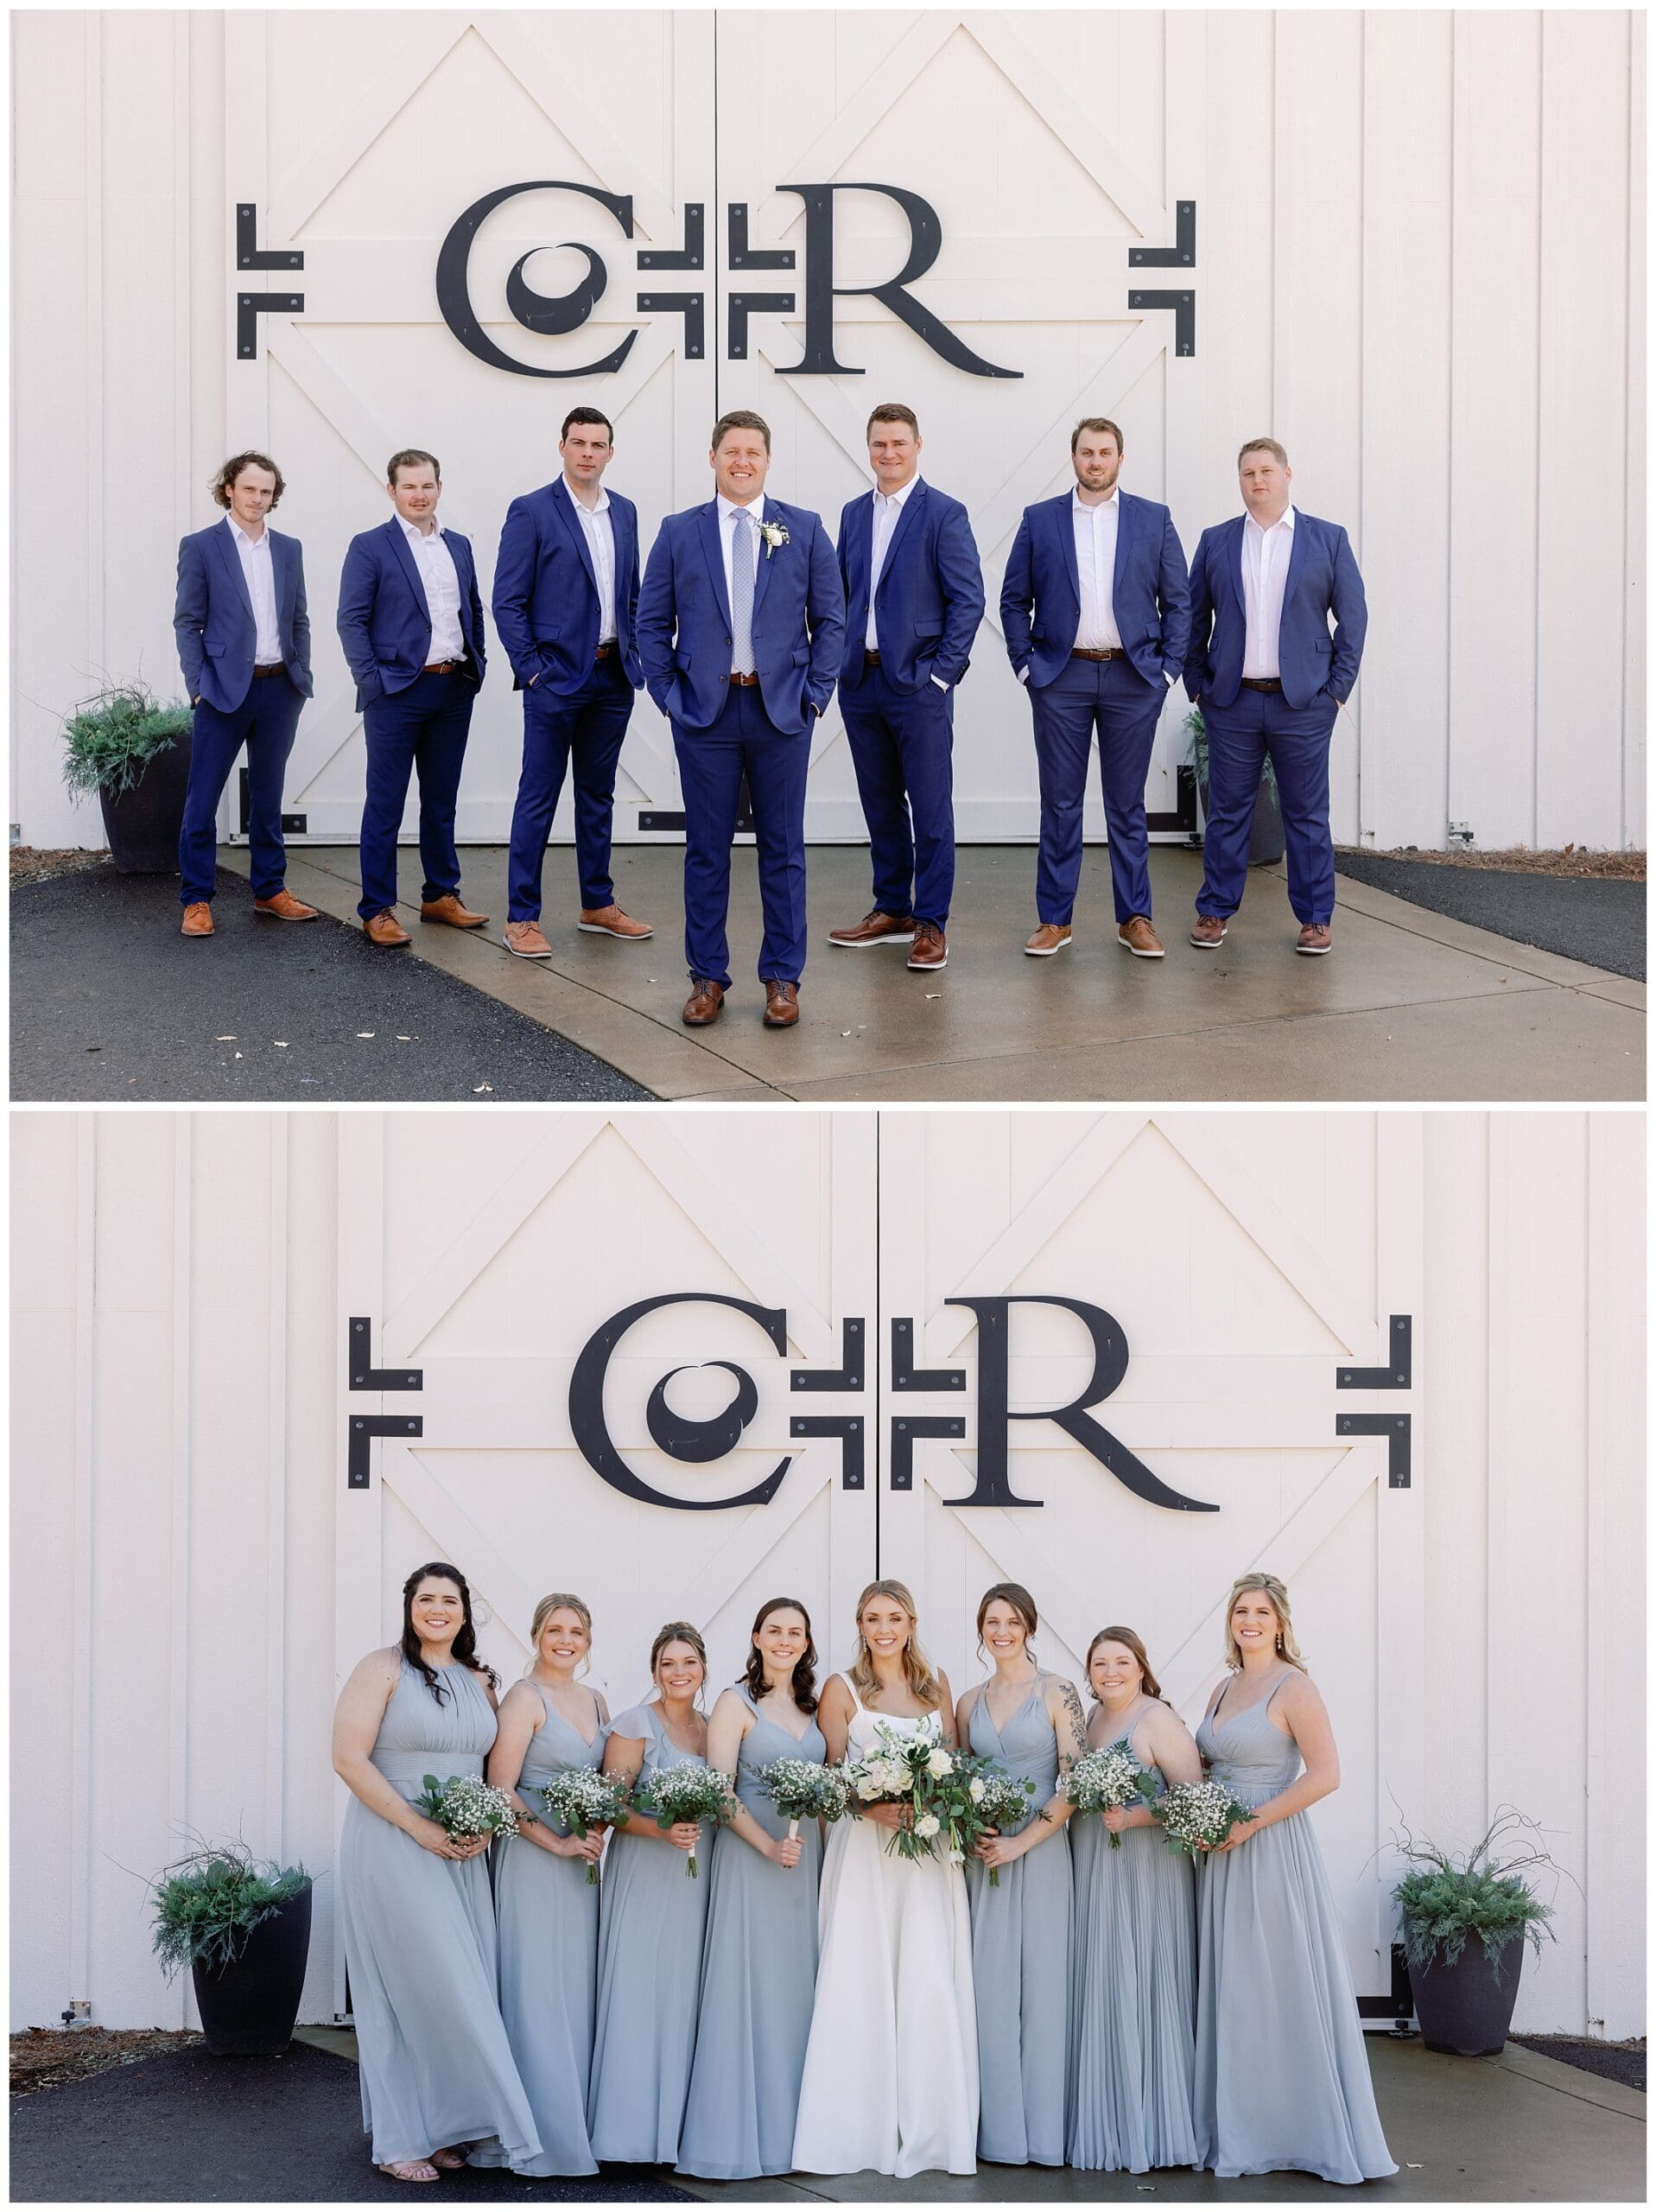 A group of bridesmaids and groomsmen standing in front of a sign.